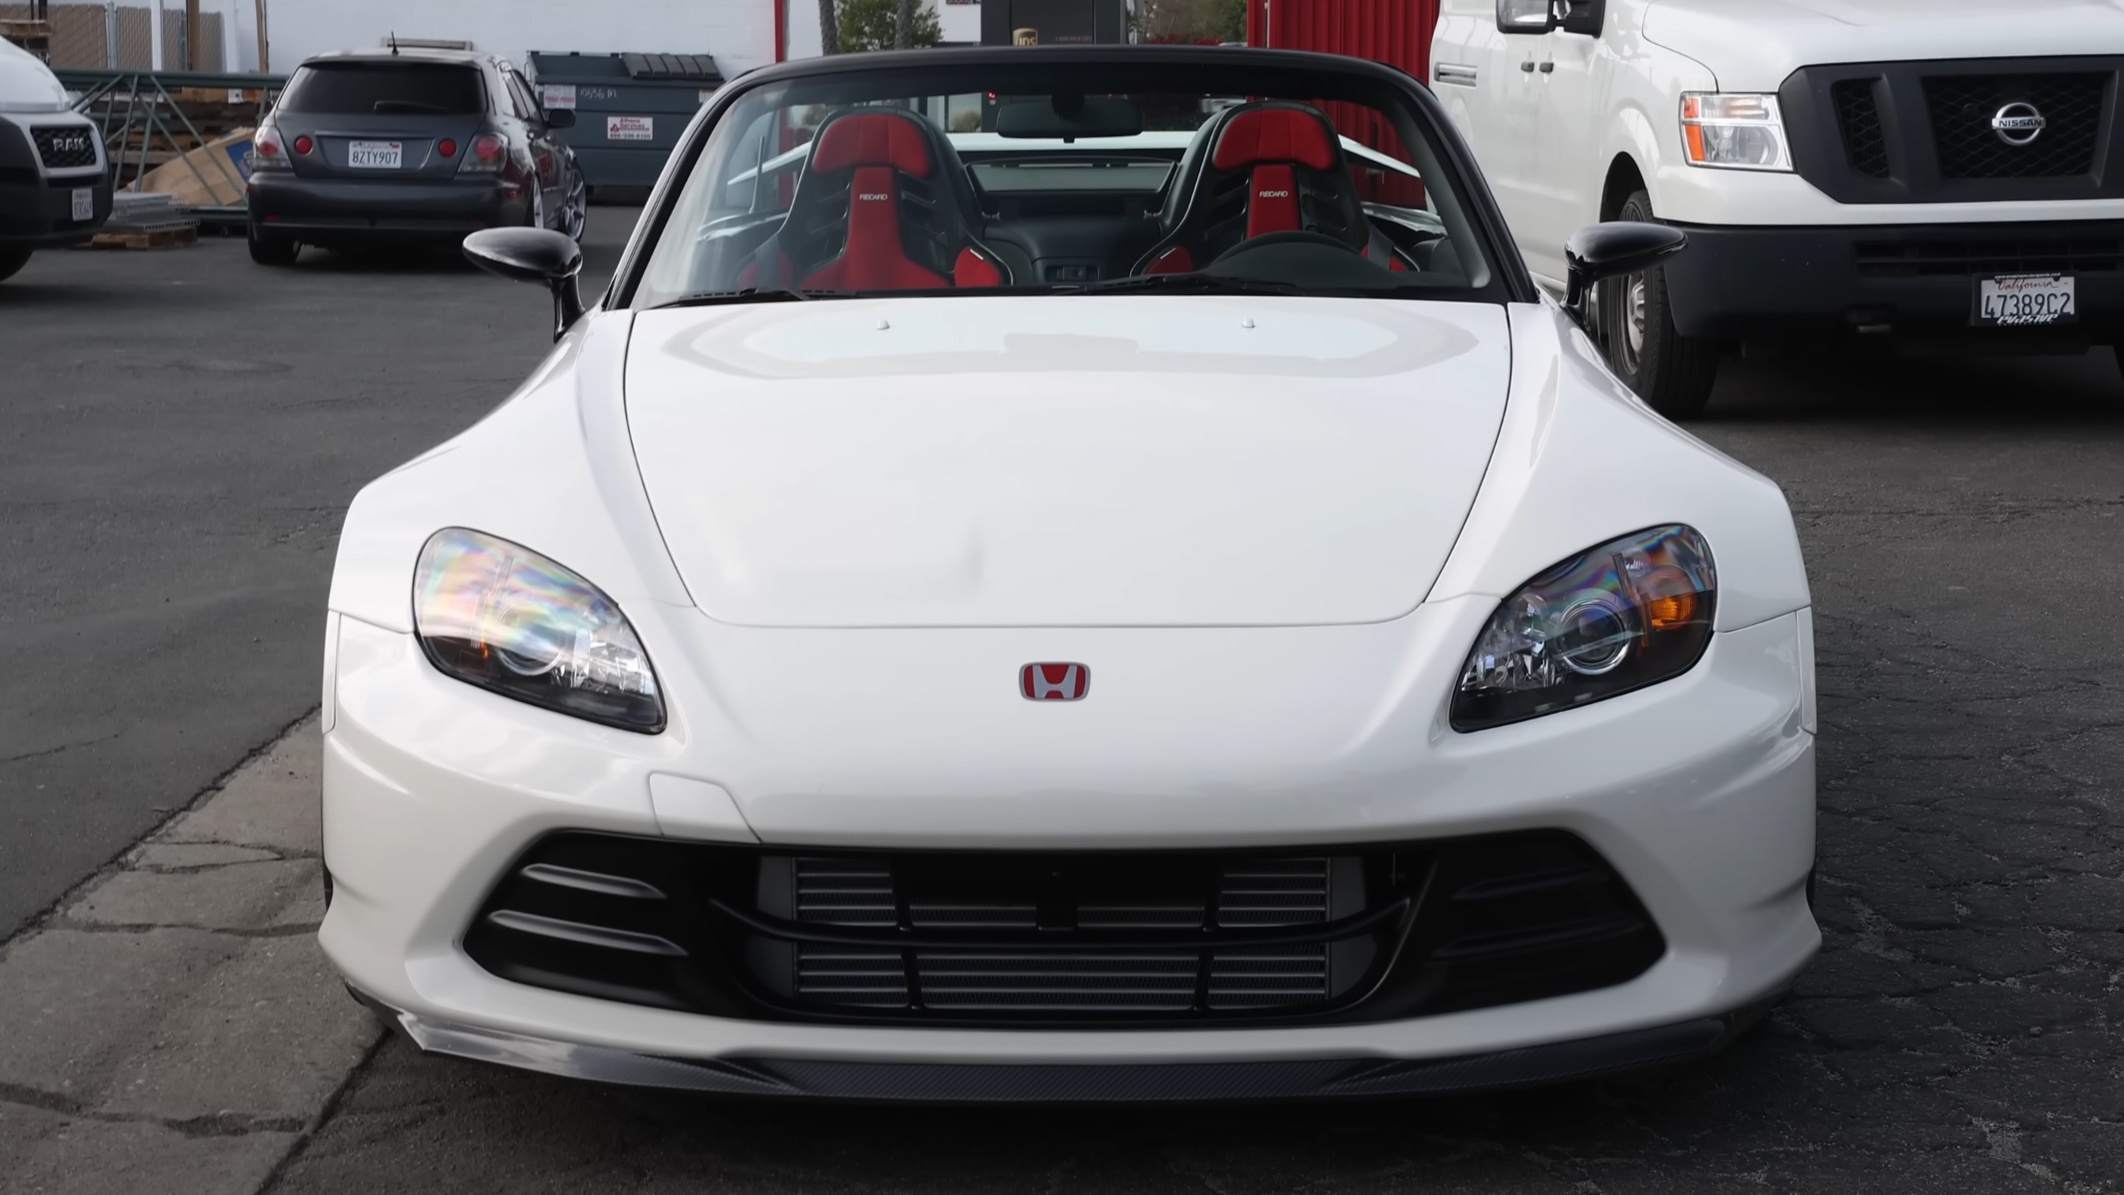 Honda S2000R By Evasive Motorsports Is The Type R Roadster That Never Was